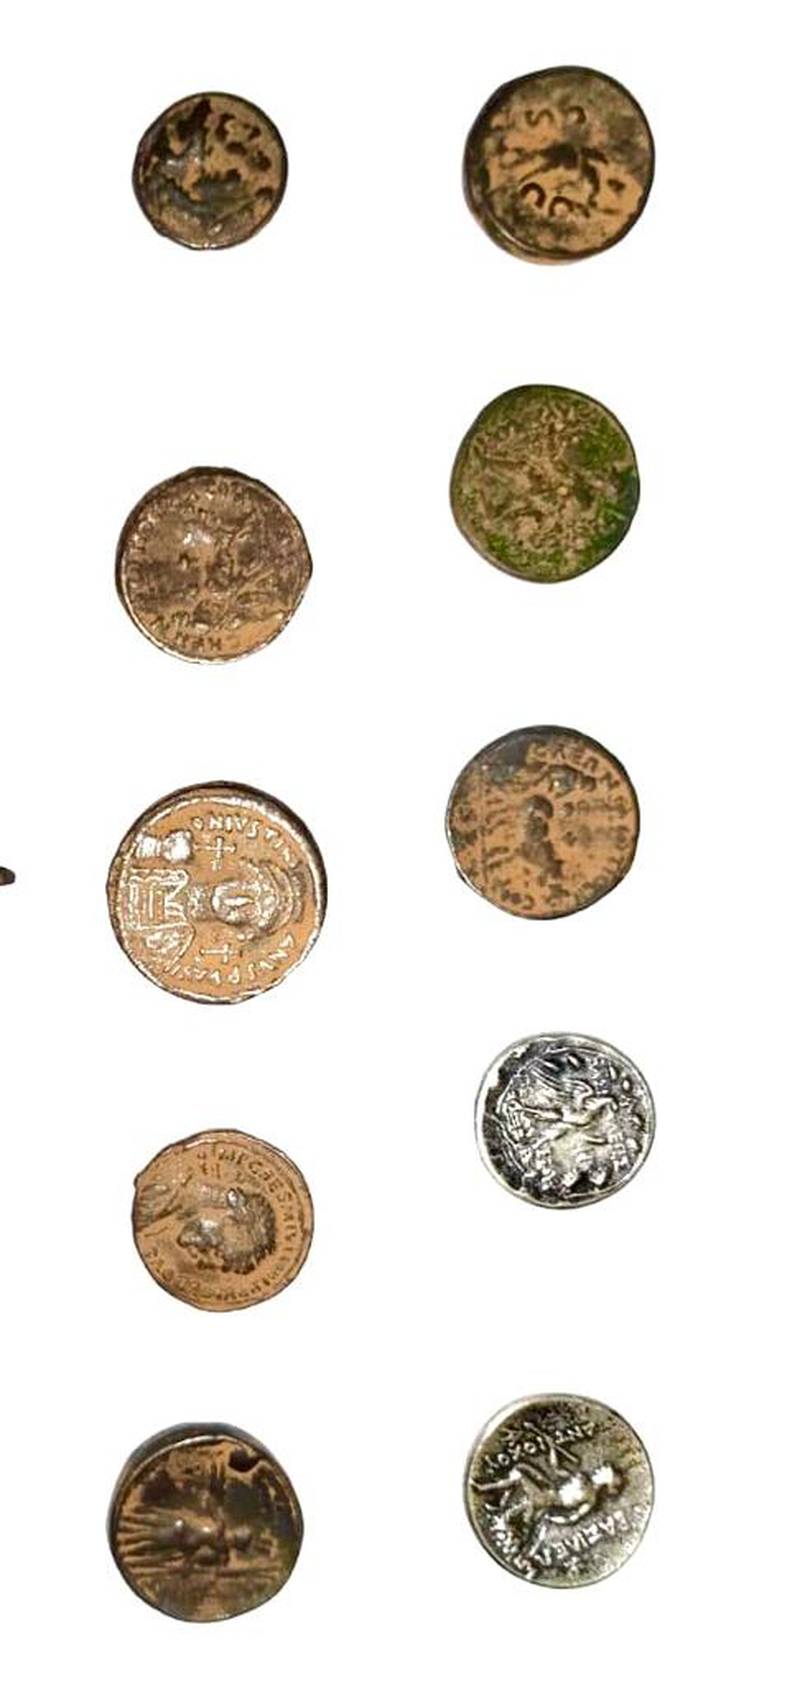 The coins were found in the luggage of a traveller leaving from Cairo International Airport on Tuesday. Photo: Egyptian Ministry of Tourism and Antiquities